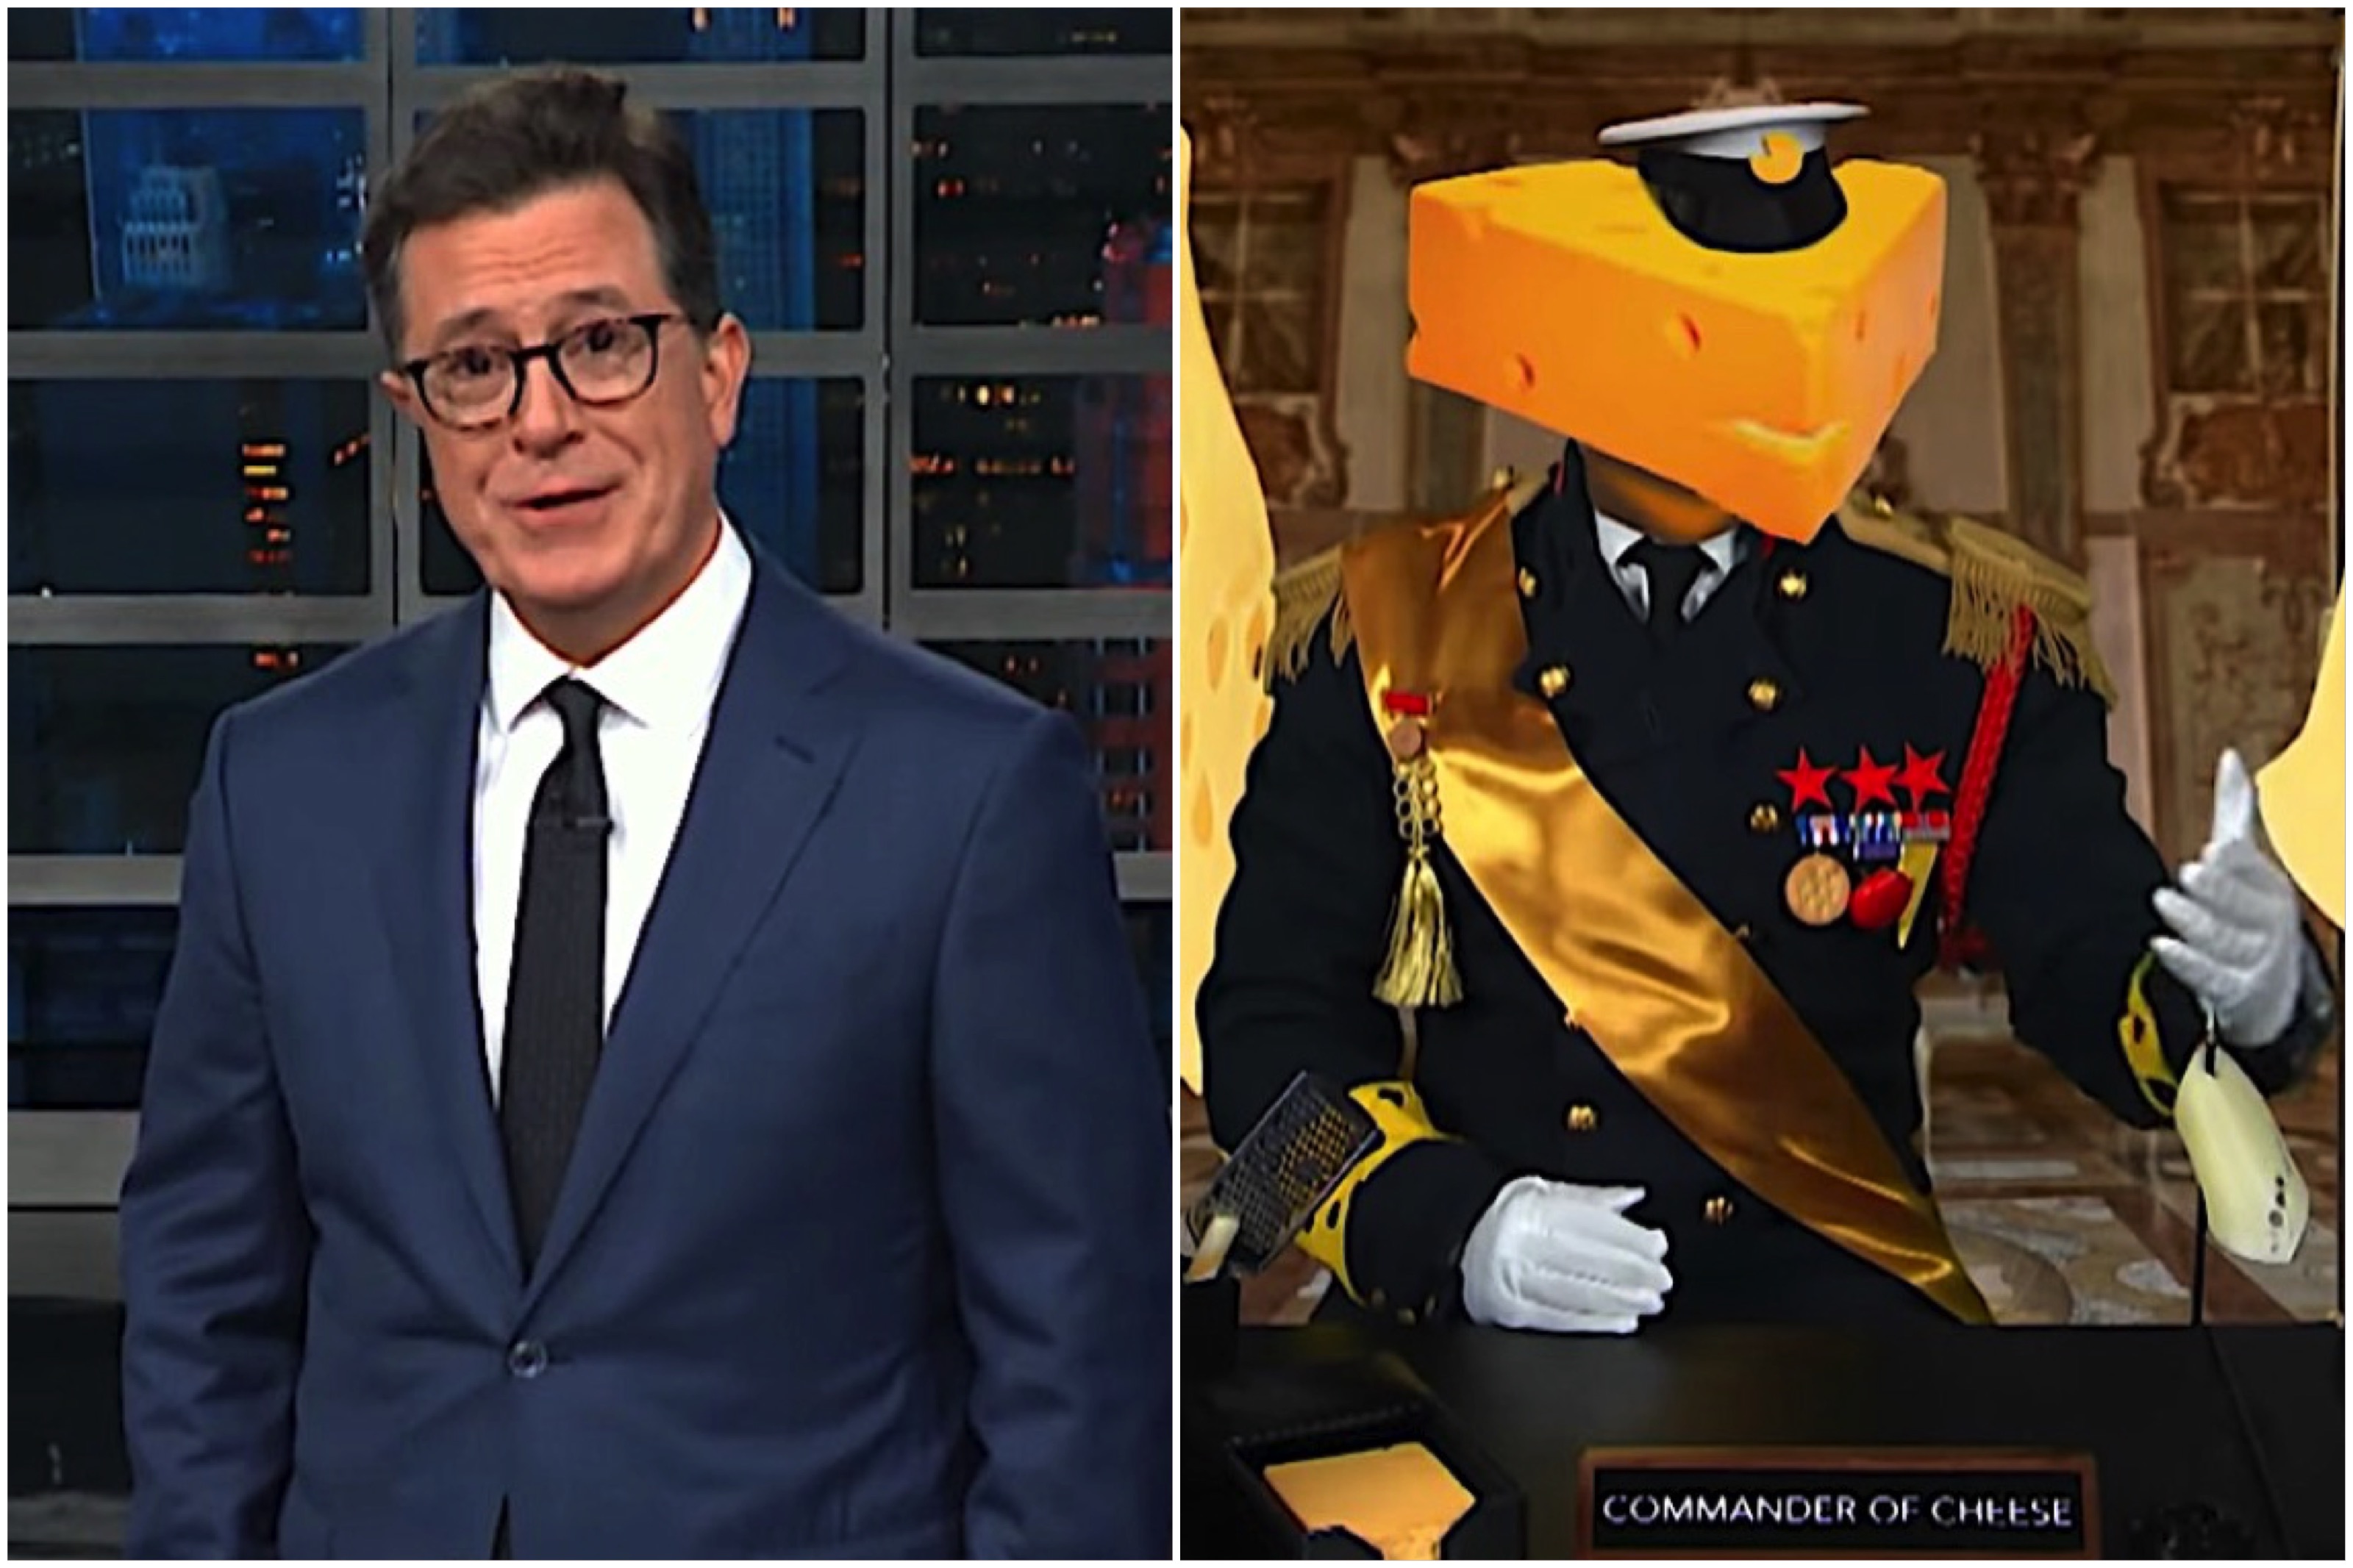 Stephen Colbert and the Commander of Cheese